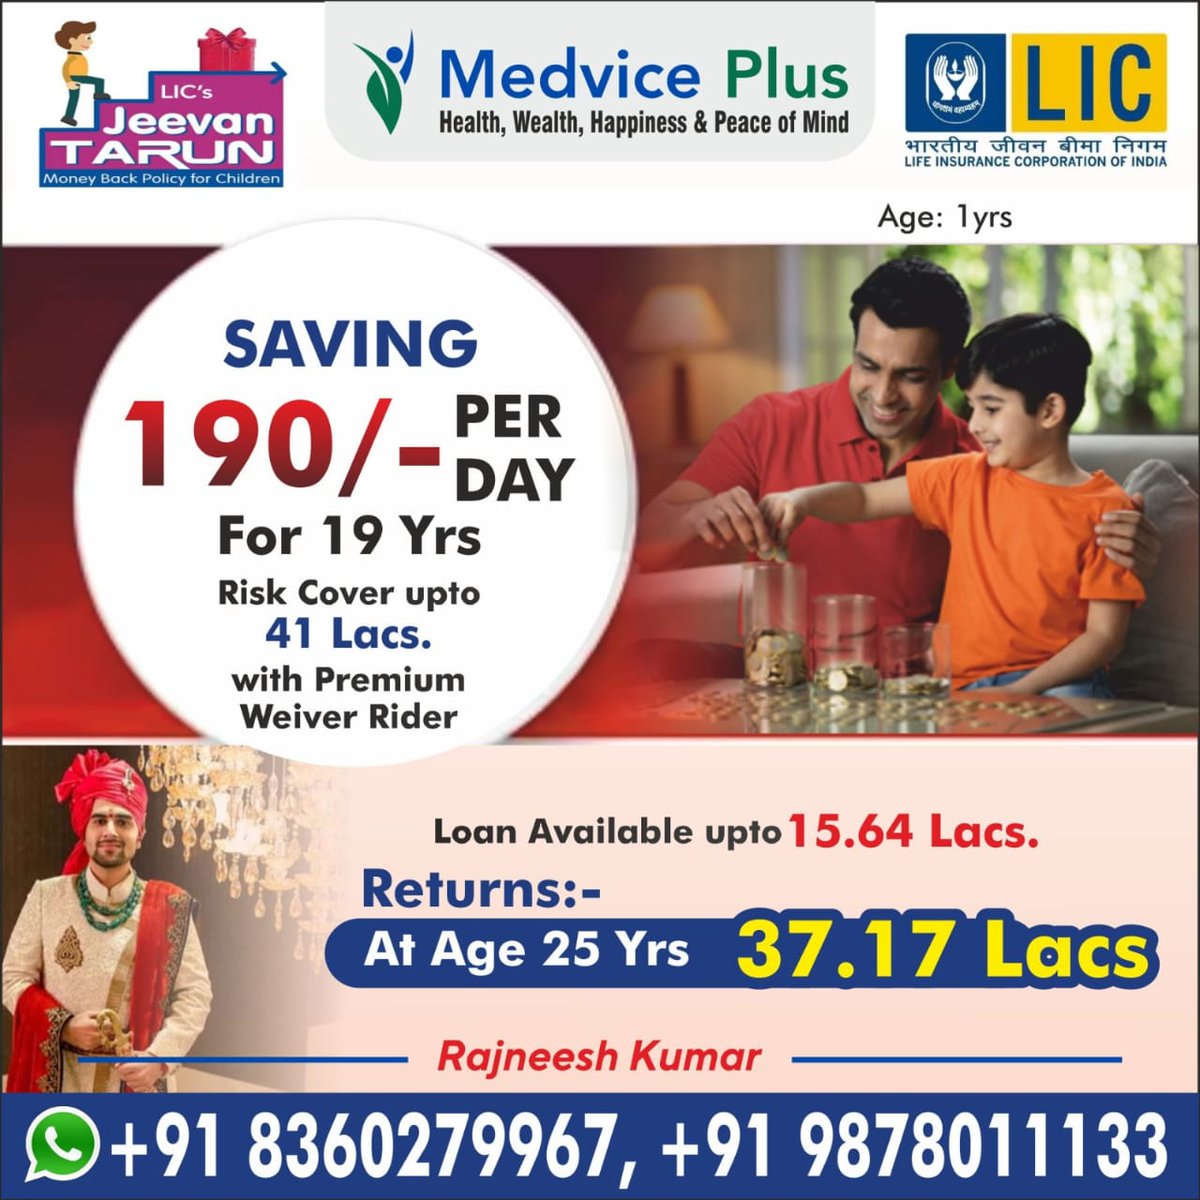 Join us in creating a world where dreams know no bounds. With Medvice Plus, we’re not just insuring lives; we’re safeguarding aspirations. 💙✨

#InvestSmart #FuturePlanning #LIC #Medvice #MedvicePlus #Chandigarh #Zirakpur #Shimla #Mohali #InsuranceSuperheroes #LifeProtection